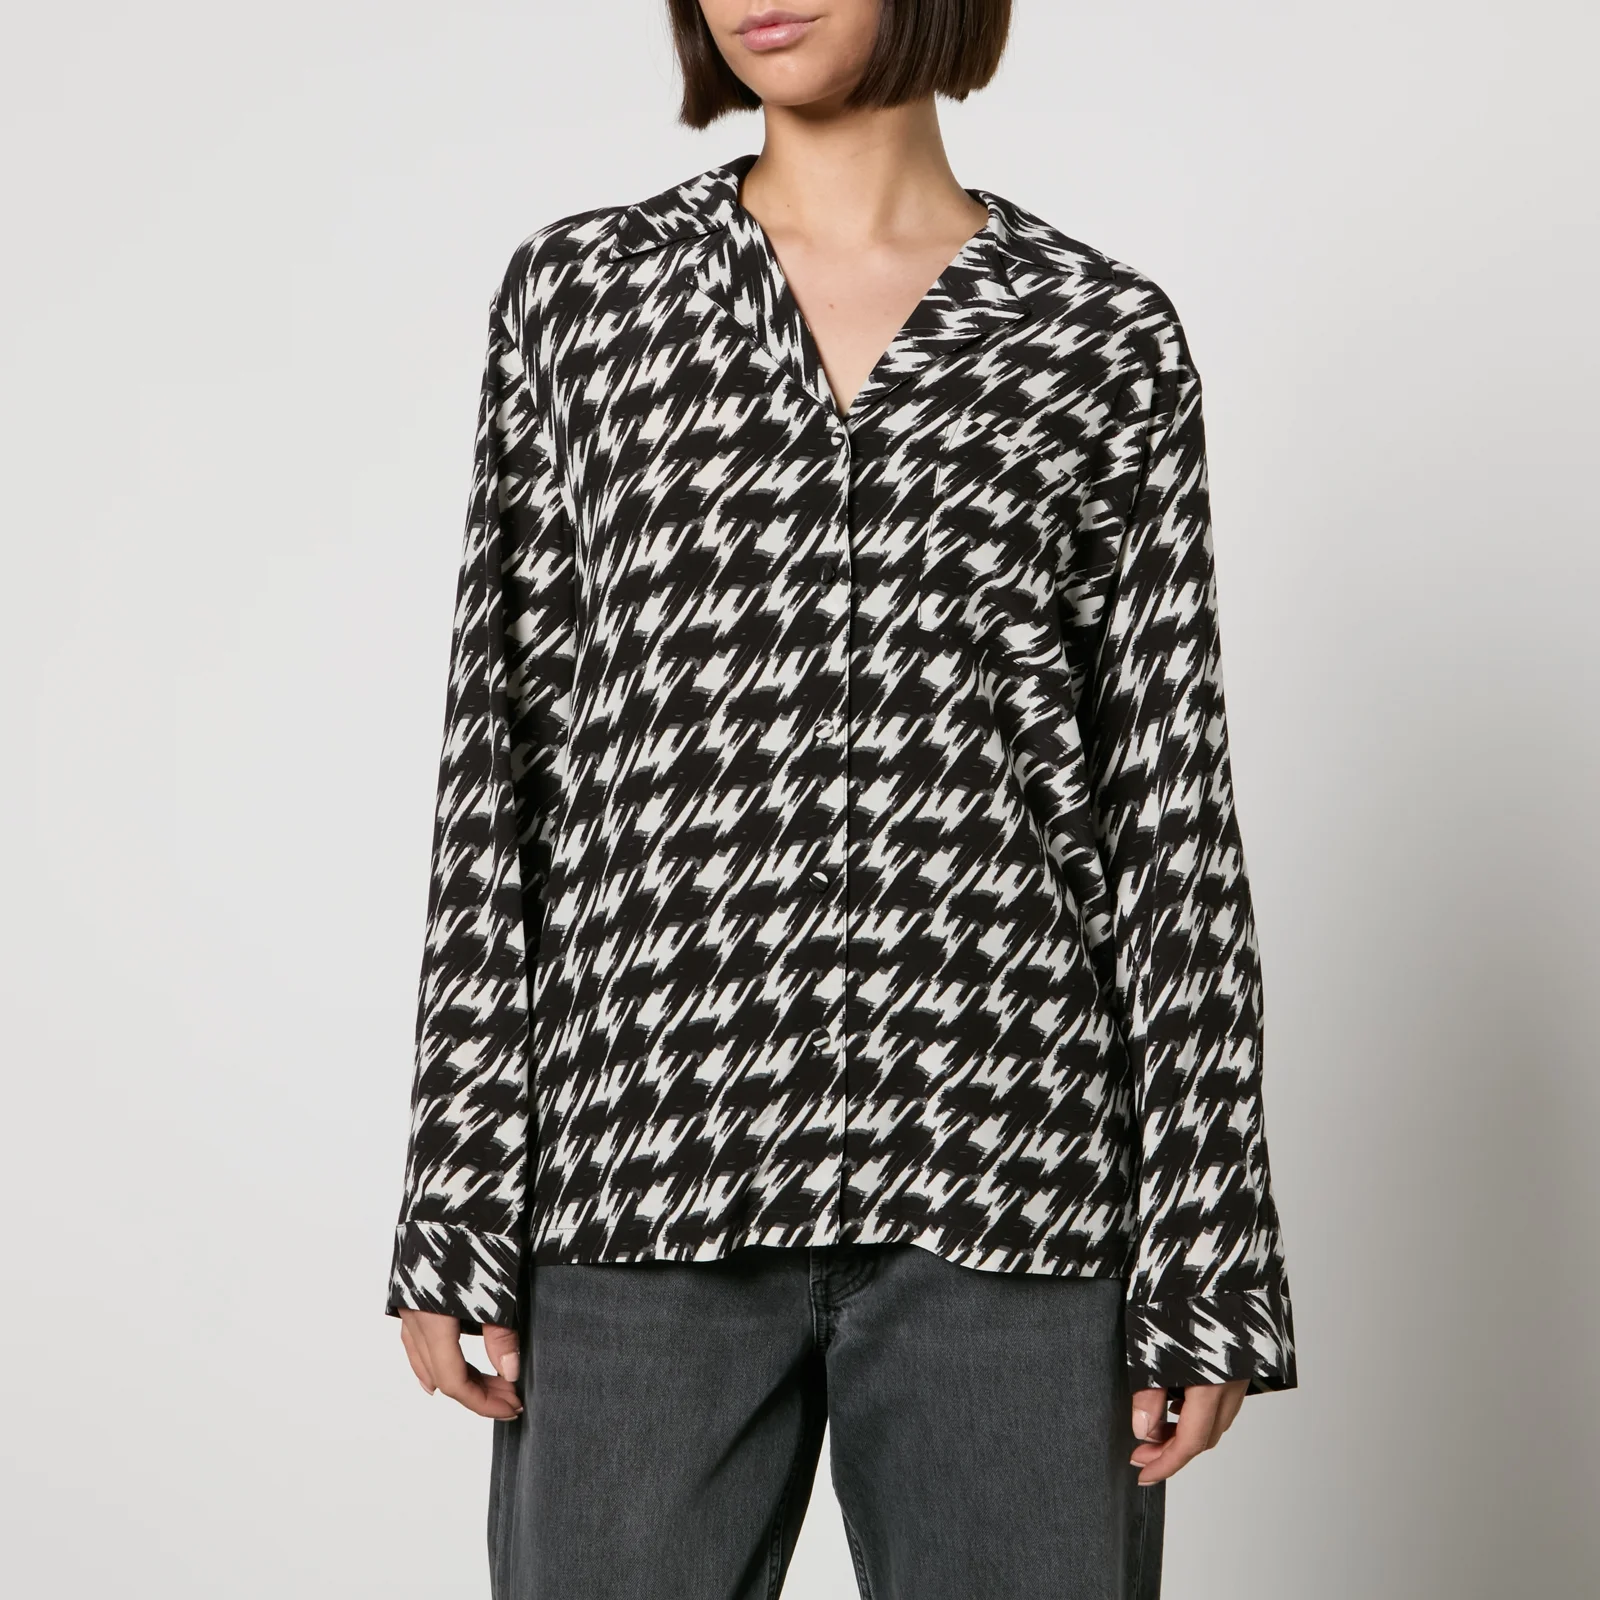 Anine Bing Aiden Houndstooth Crepe de Chine Shirt Image 1